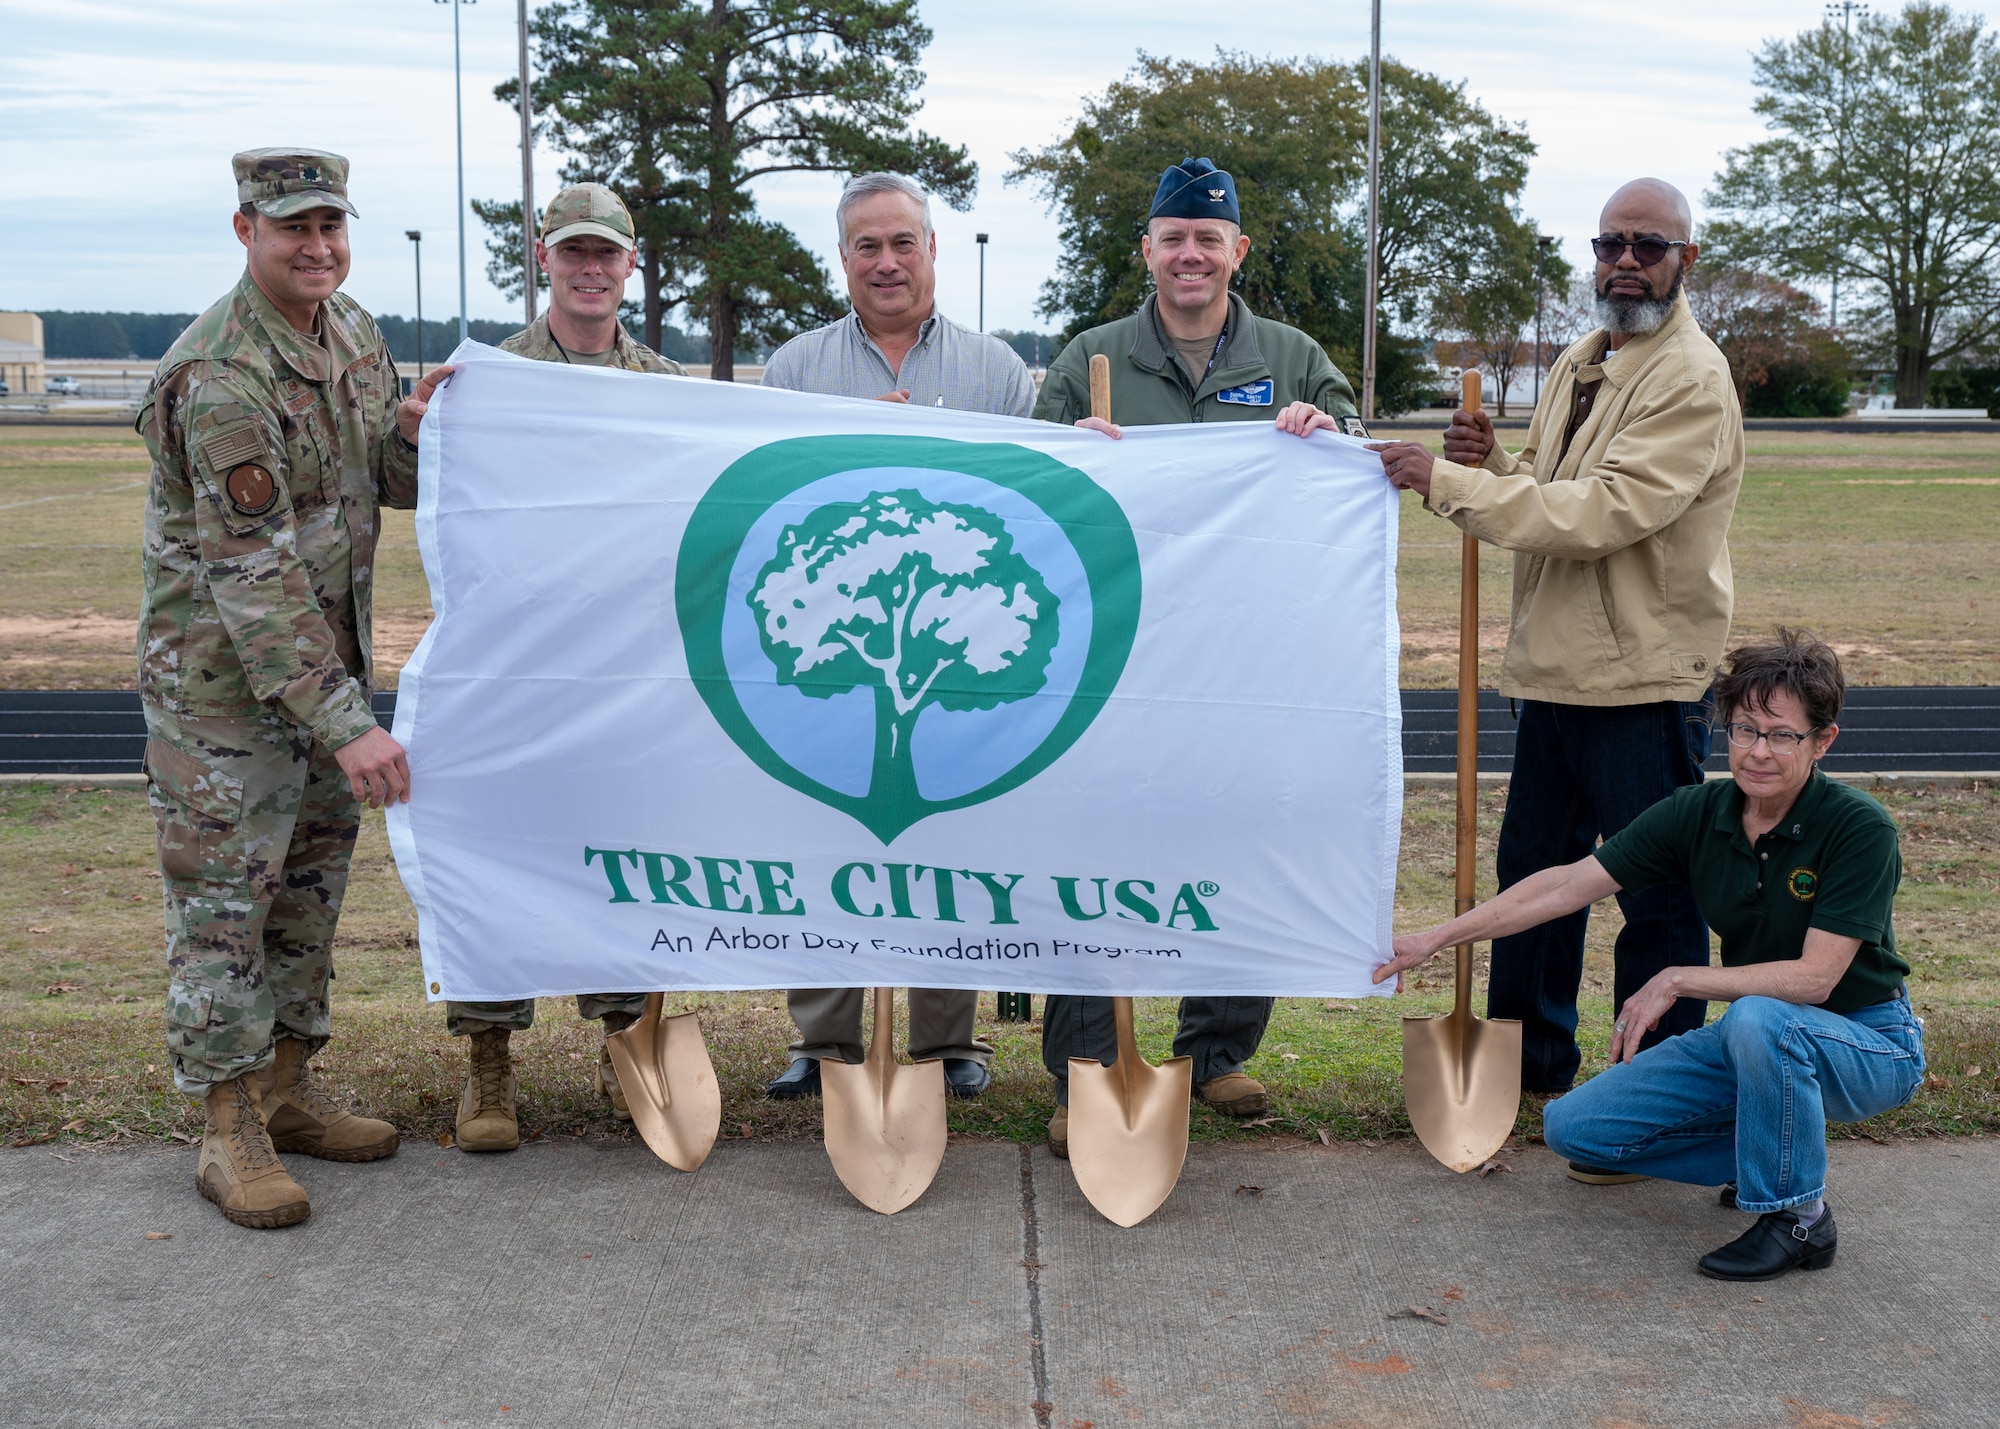 A group of people hold a flag that says Tree City USA.